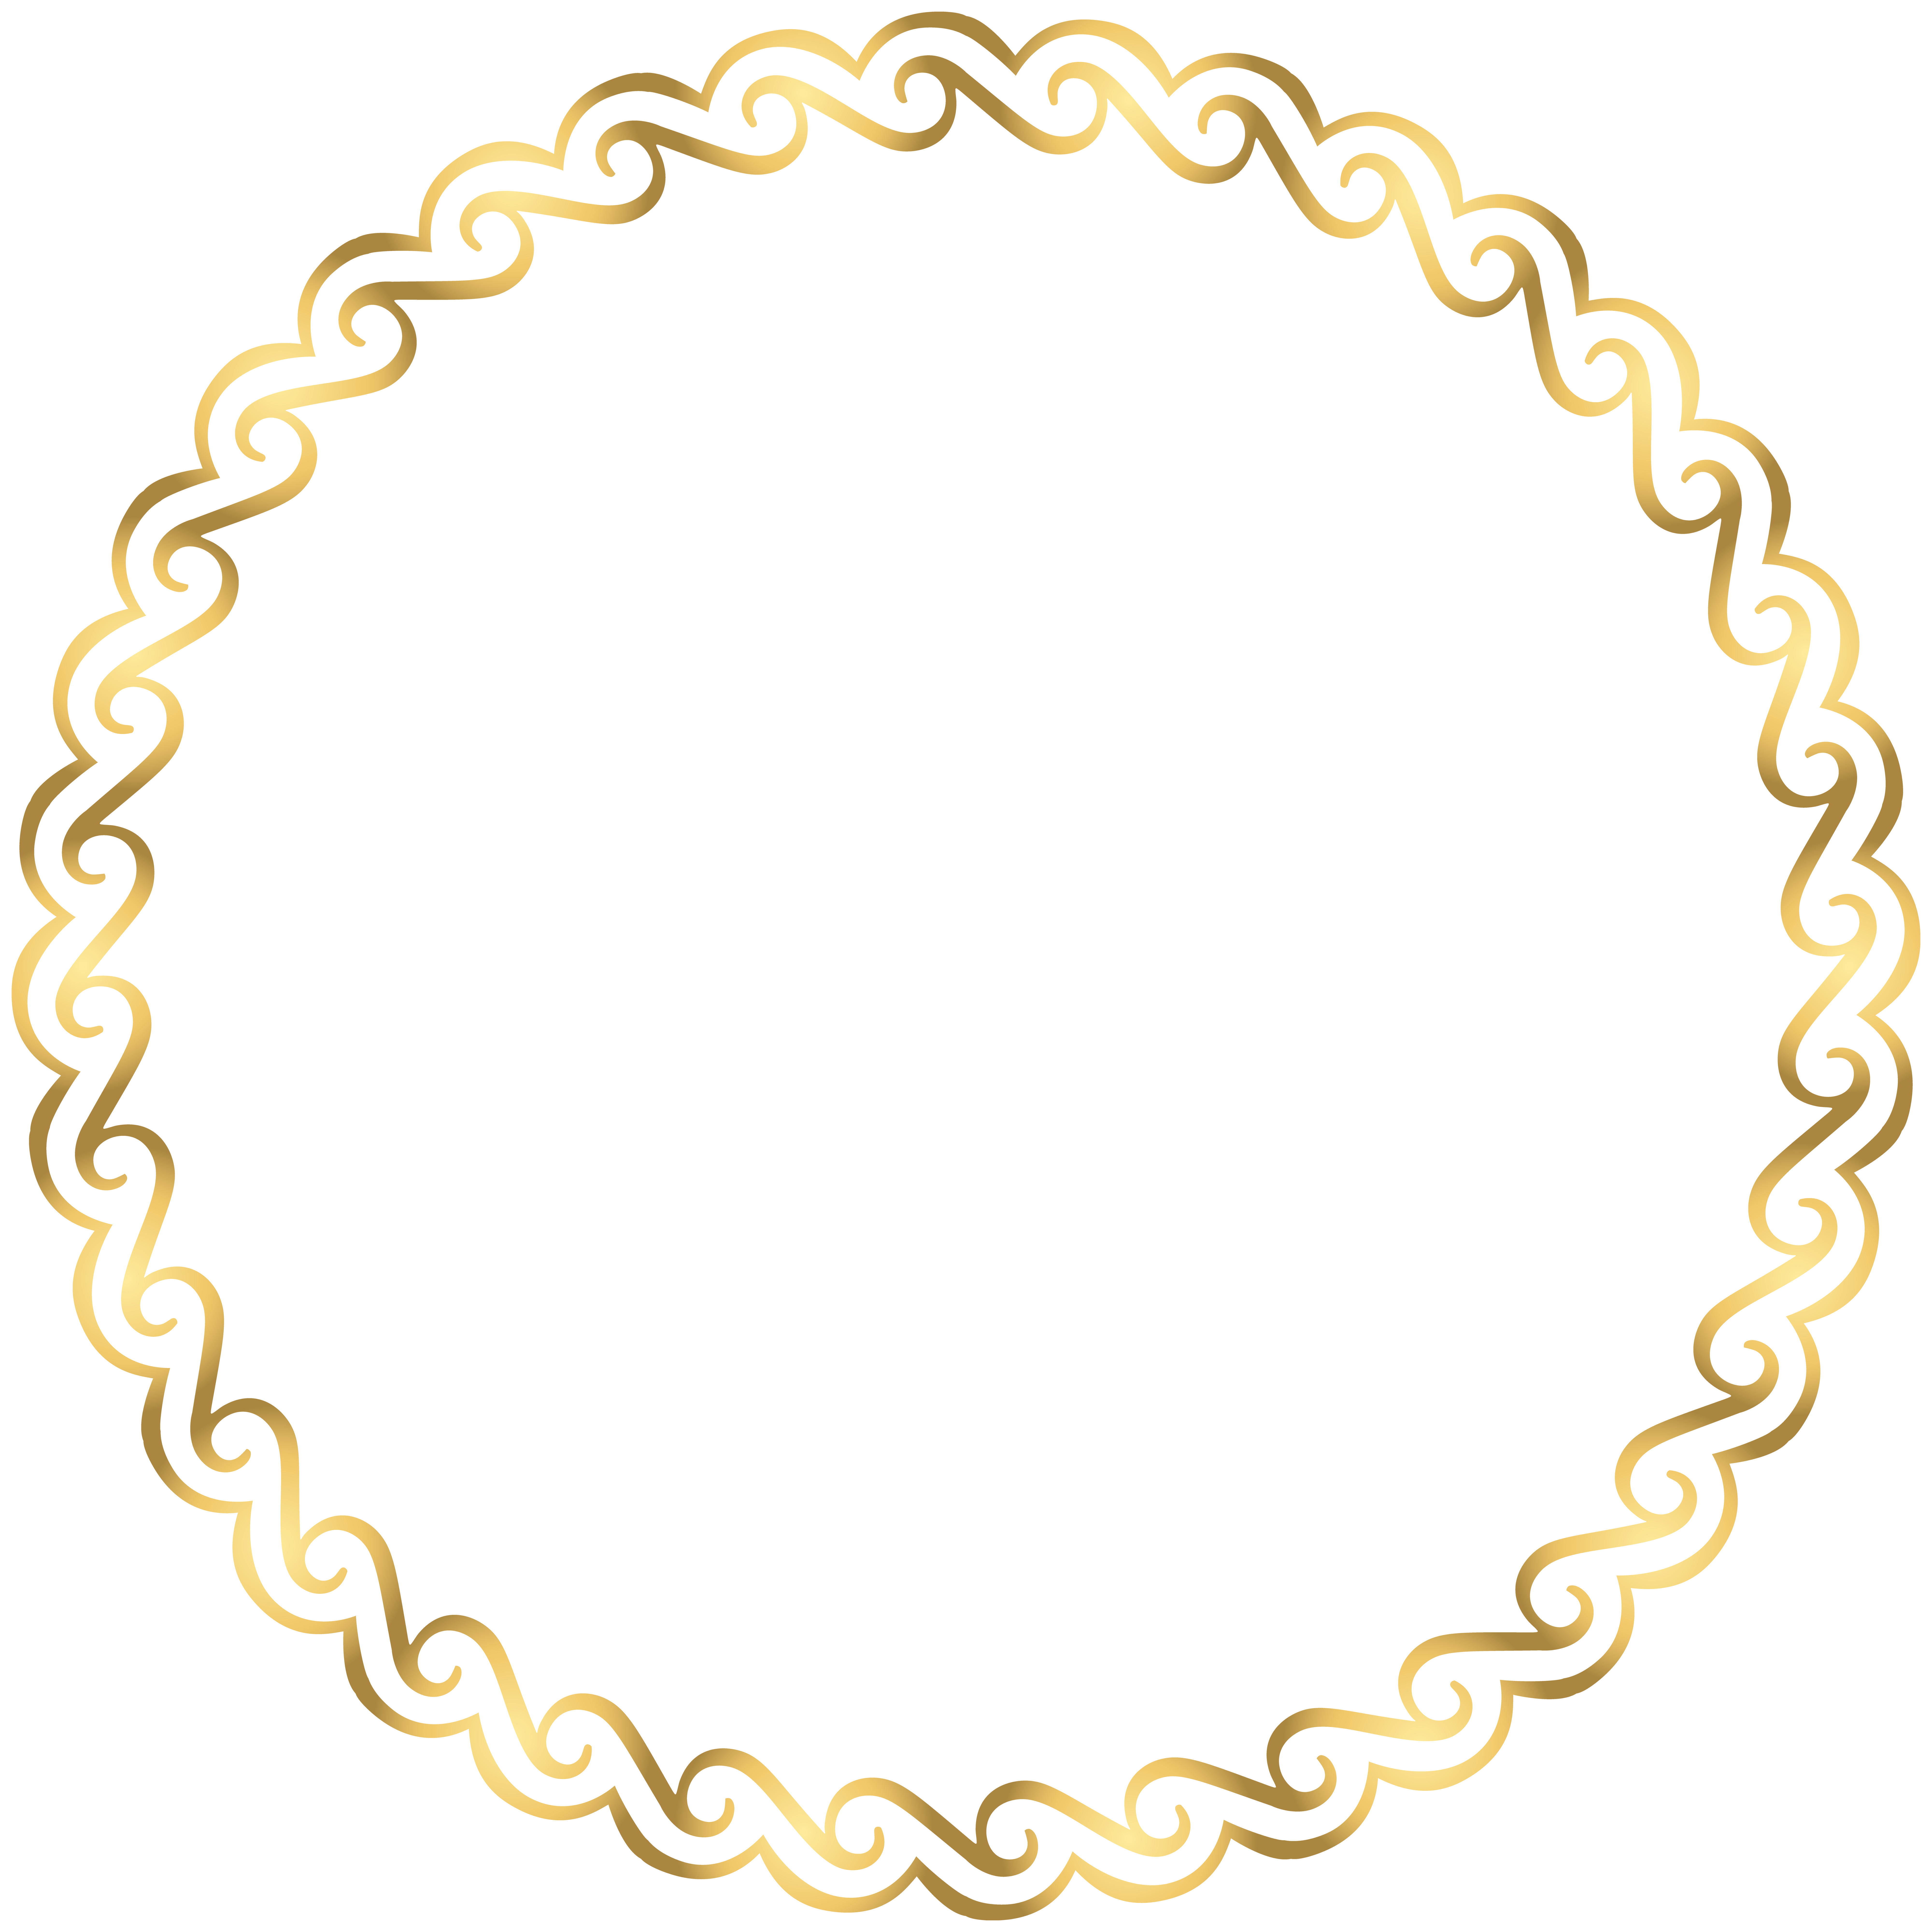 Circle Border Frame PNG Transparent Clipart​  Gallery Yopriceville -  High-Quality Free Images and Transparent PNG Clipart